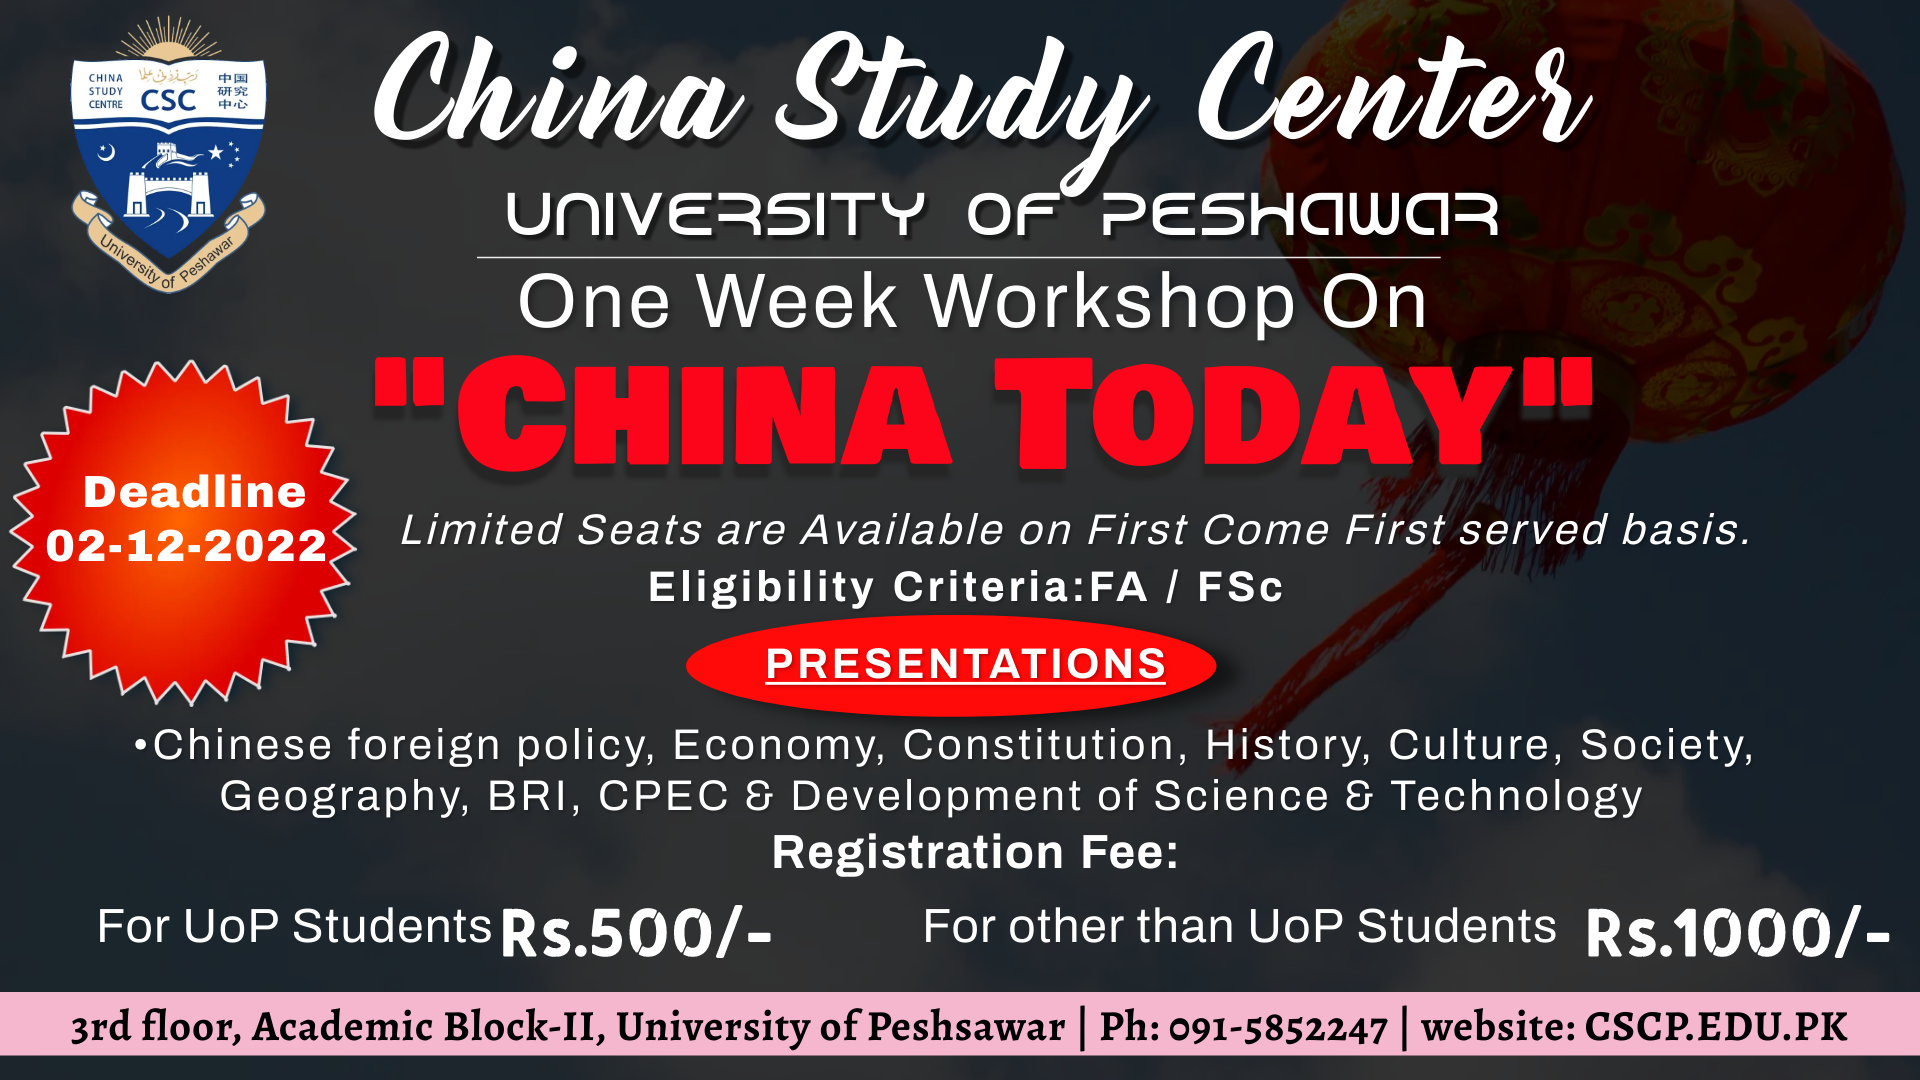 ONE WEEK WORKSHOP “CHINA TODAY”